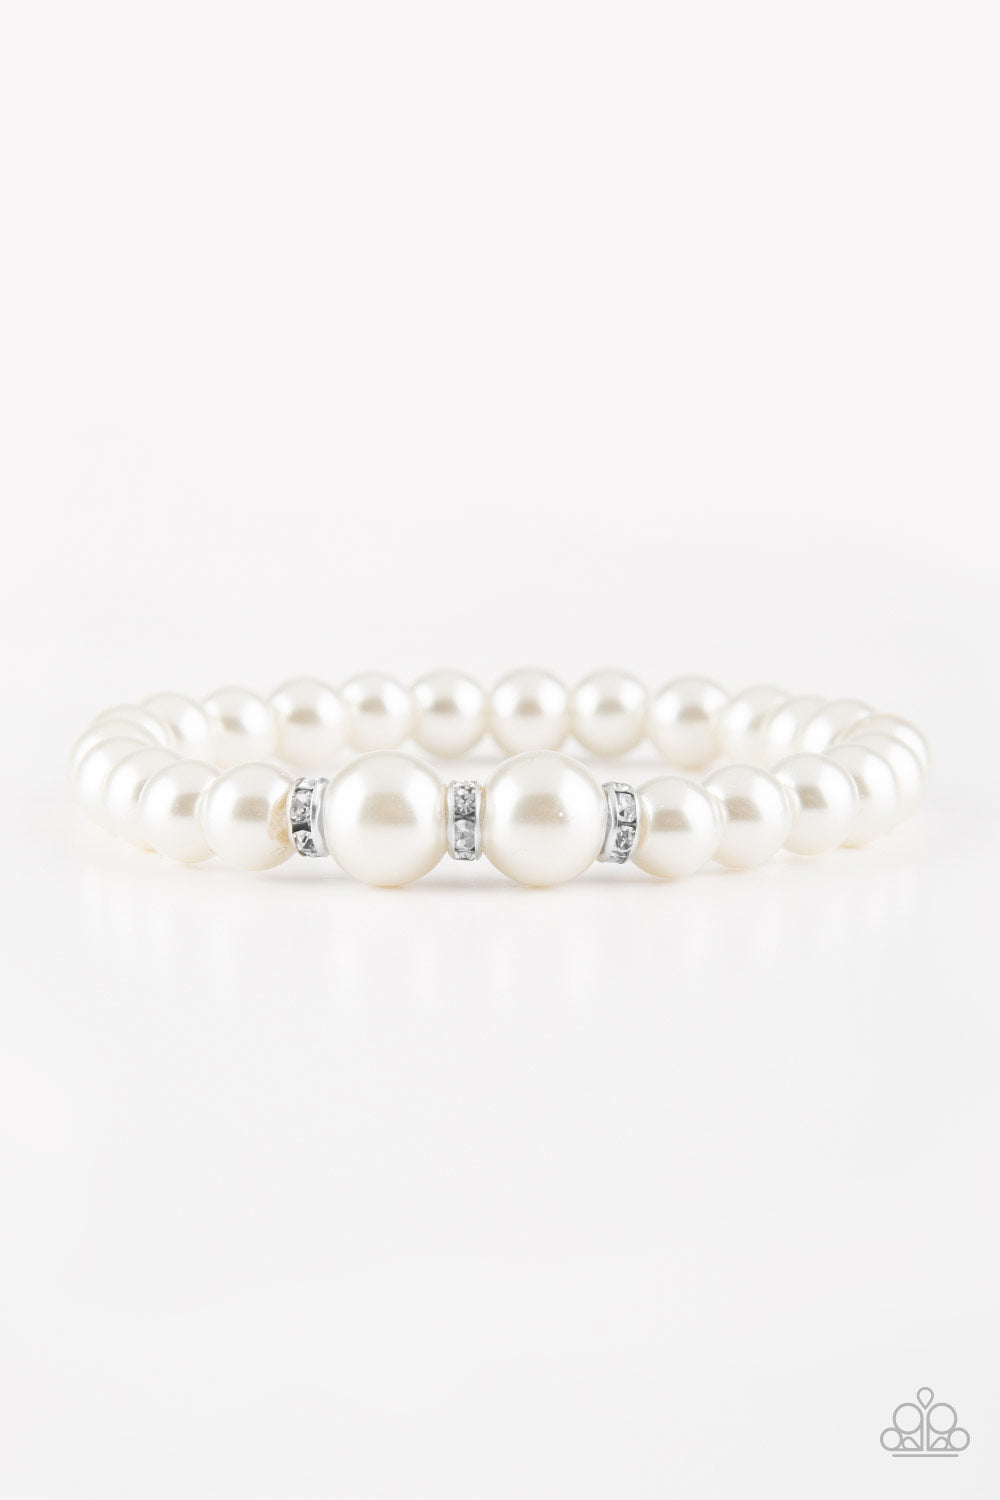 Radiantly Royal - White Pearl Bracelet - Paparazzi Accessories